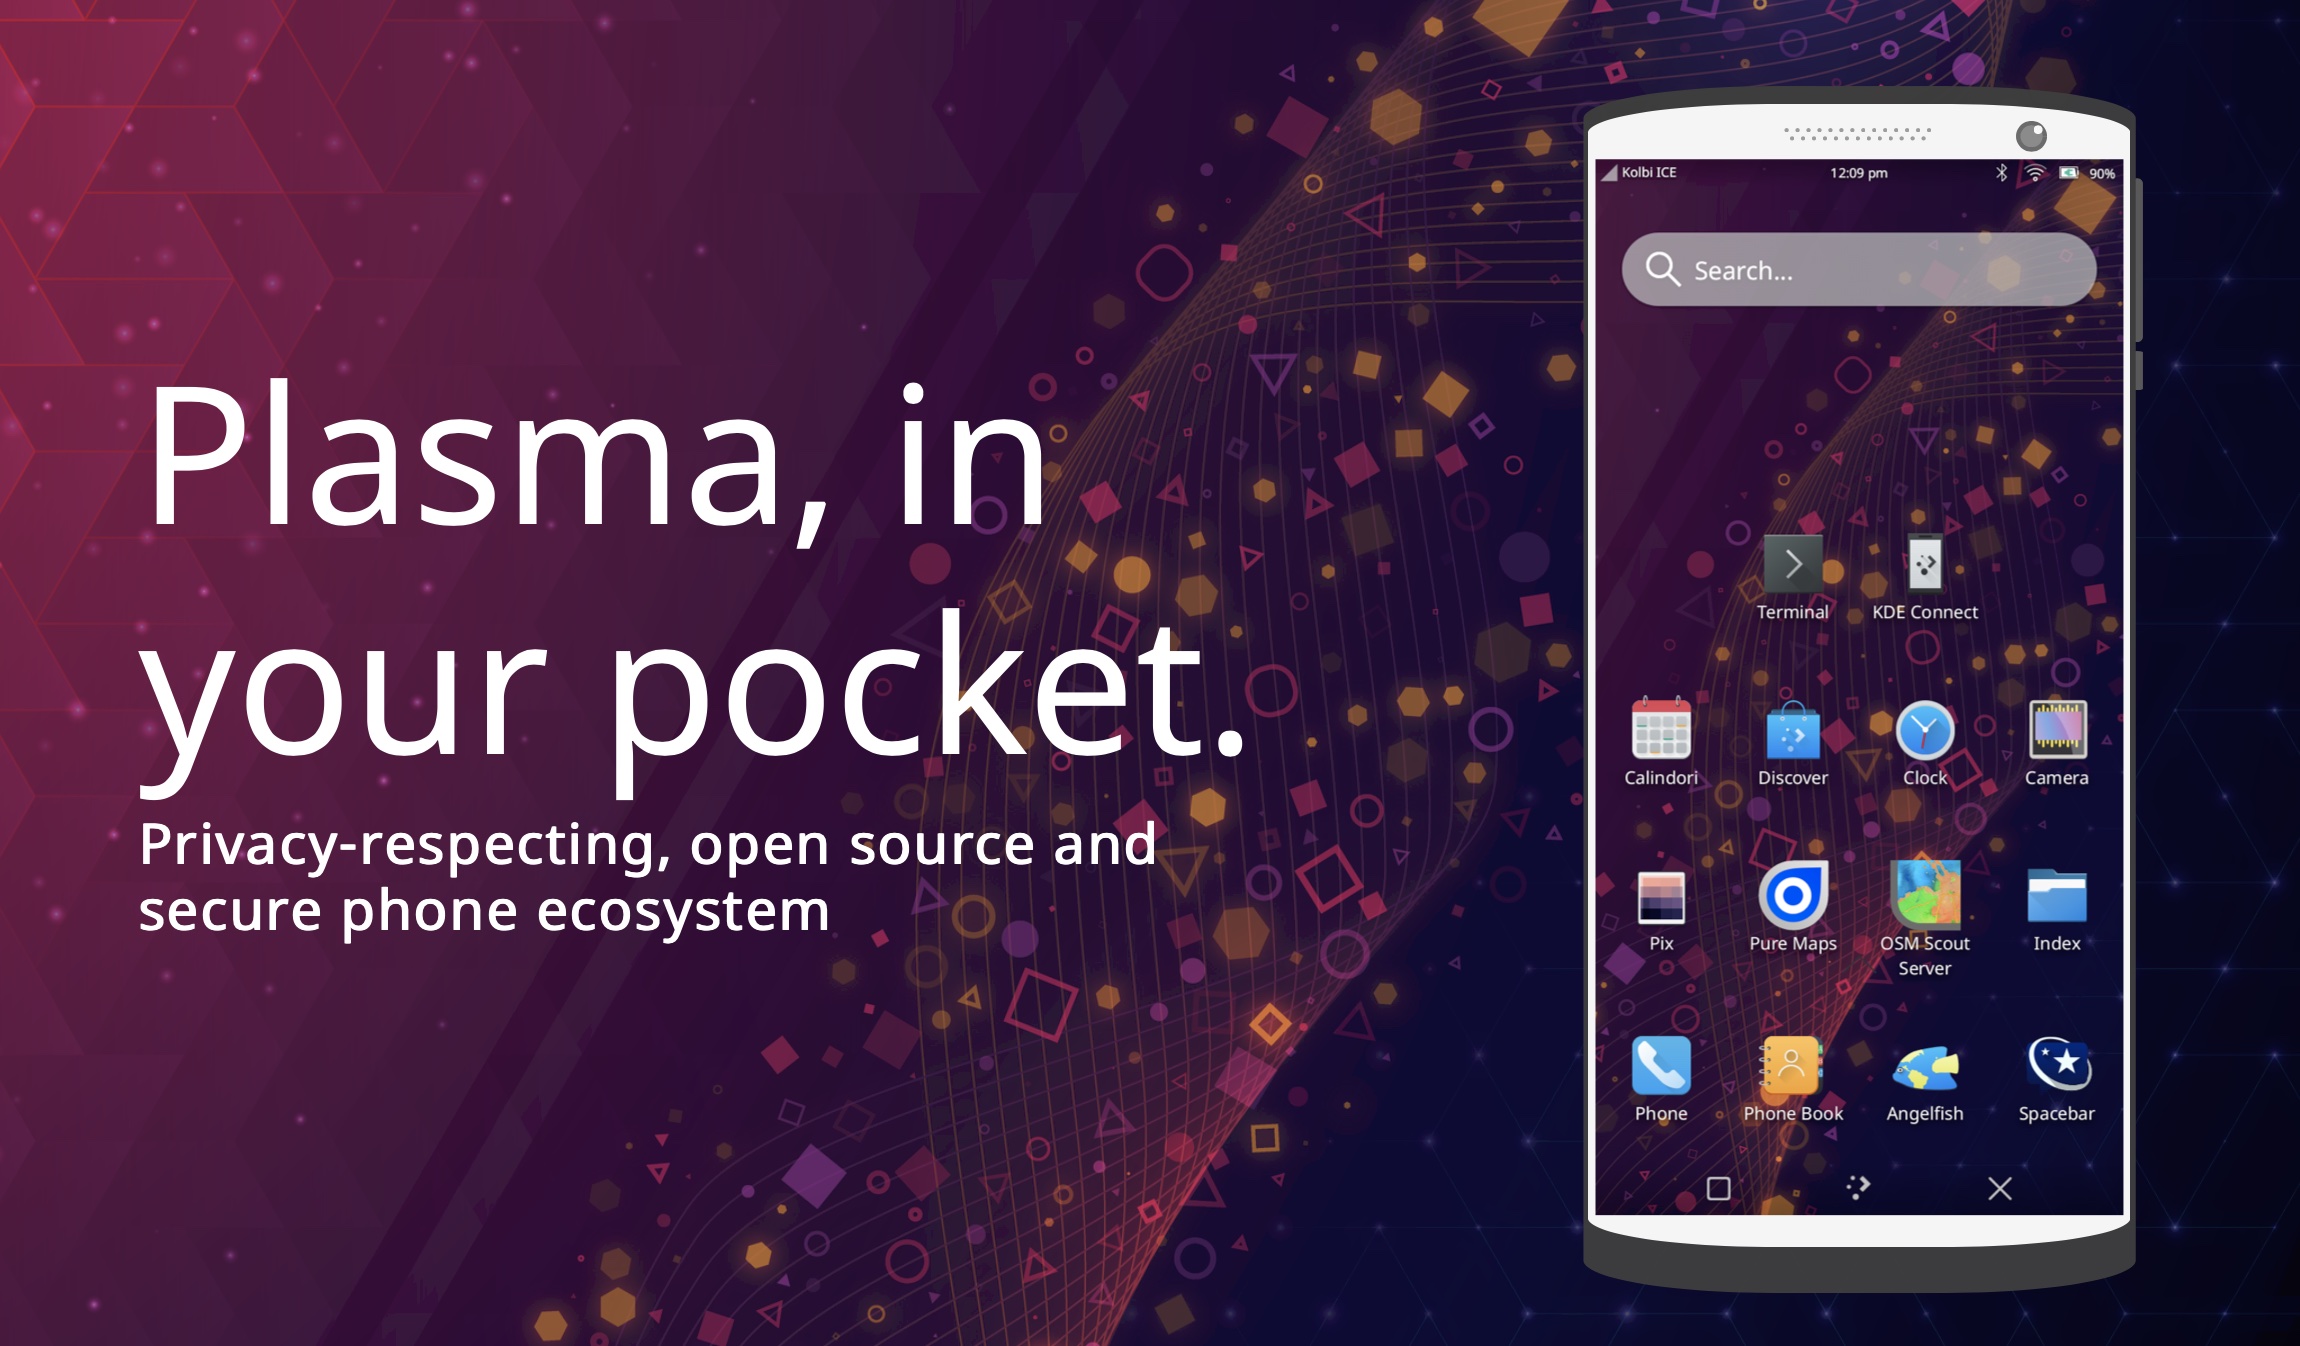 KDE’s Plasma Mobile Gets Improved Homescreen and Settings, Lots of App Updates